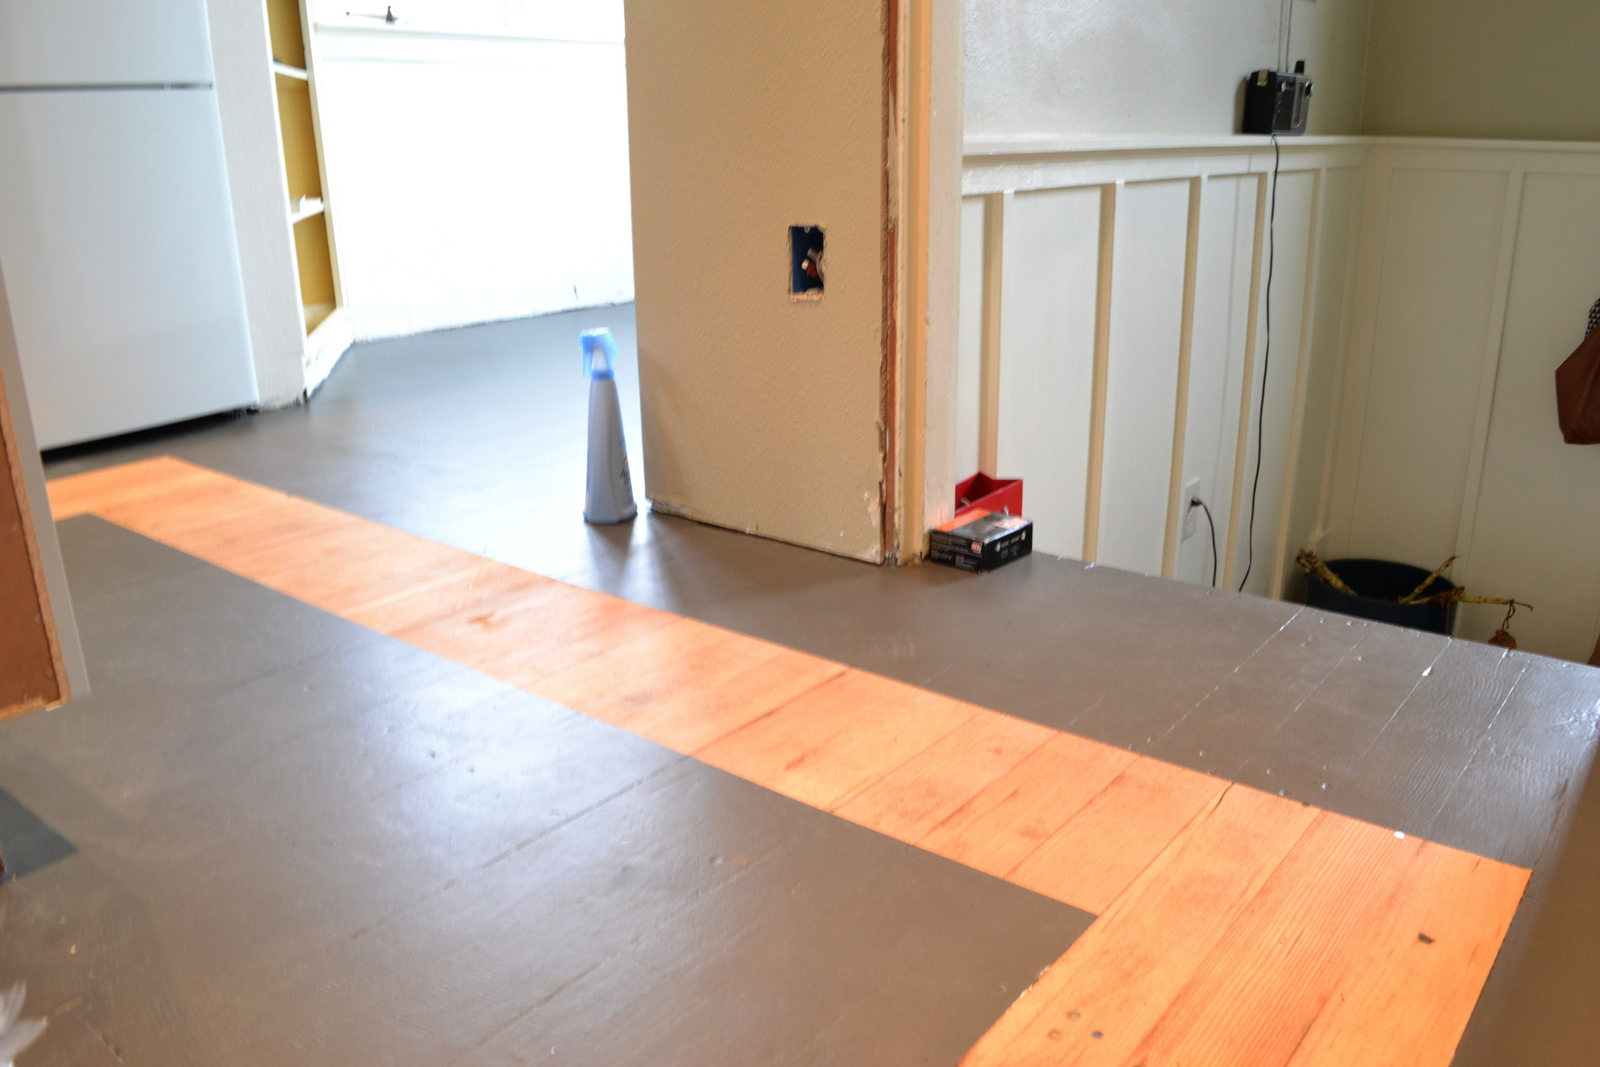 a home in the making: {renovate} how to paint a kitchen floor